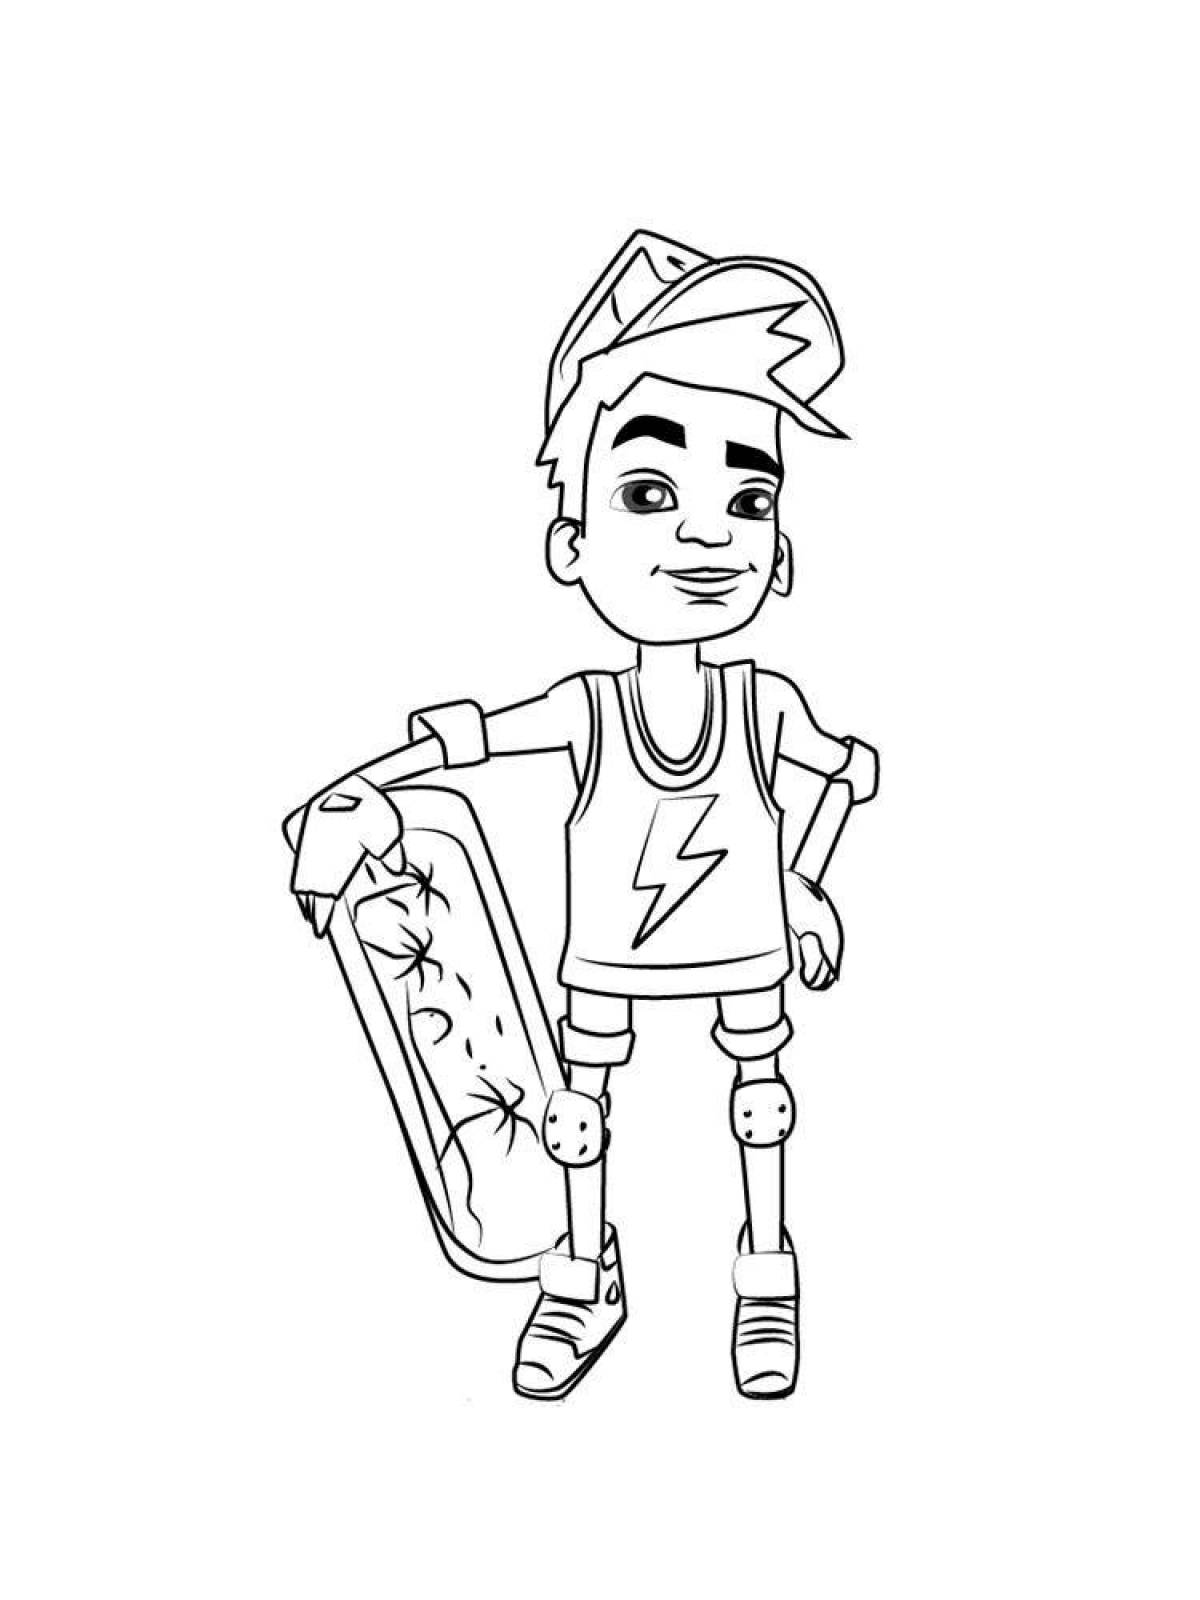 Subway surfers playful coloring